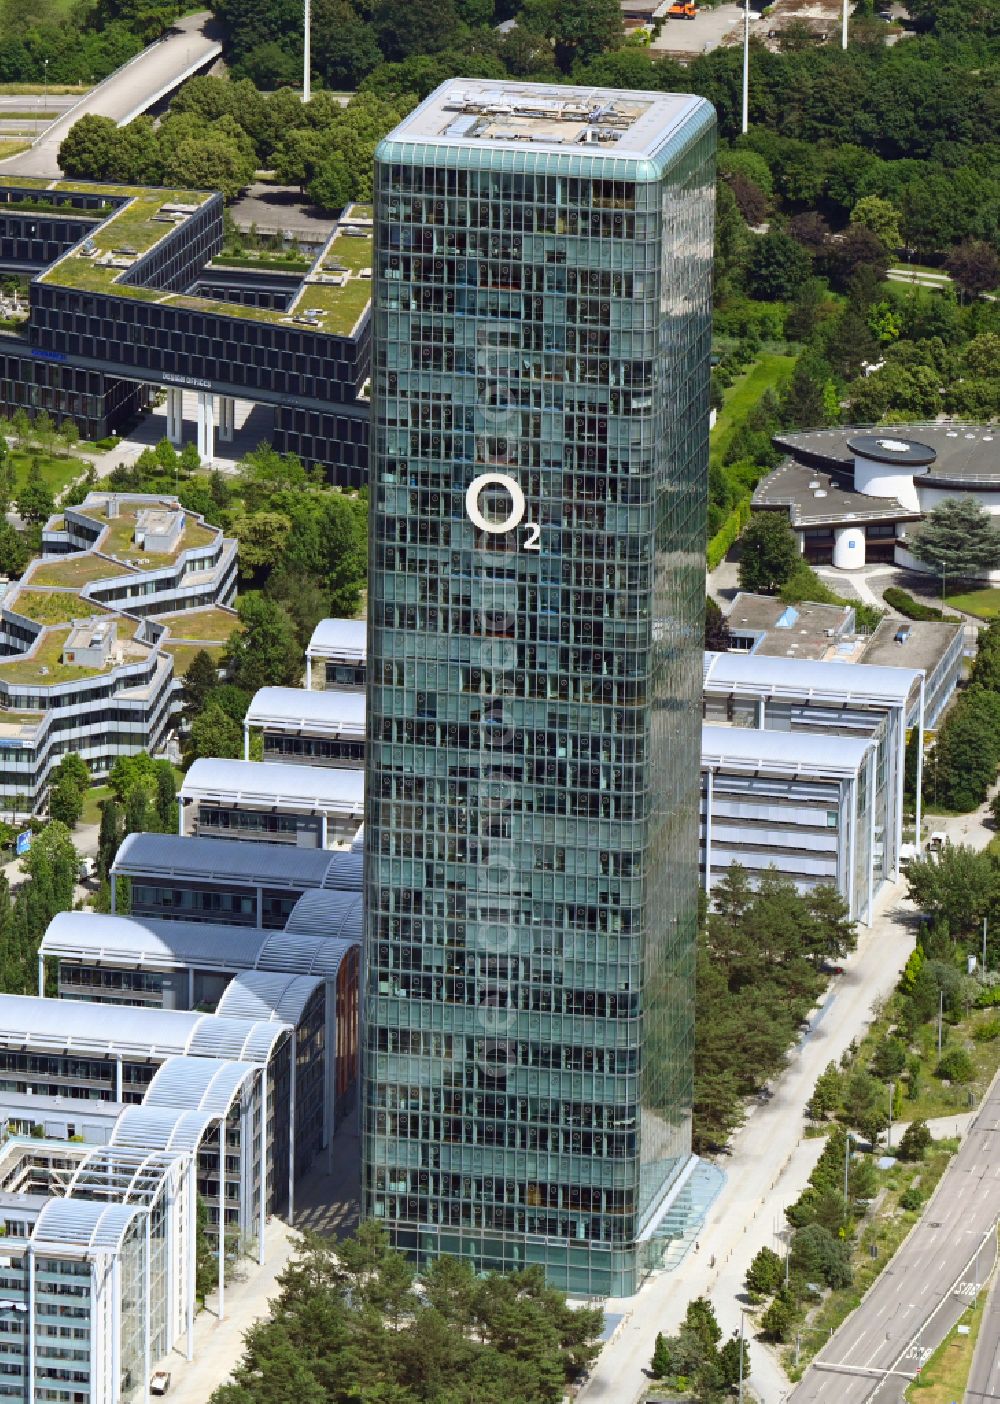 München from above - Uptown high-rise building - headquarters of Telefonica Germany (O2) and Astellas Pharma GmbH on Georg-Brauchle-Ring in the Moosach district of Munich in the state of Bavaria